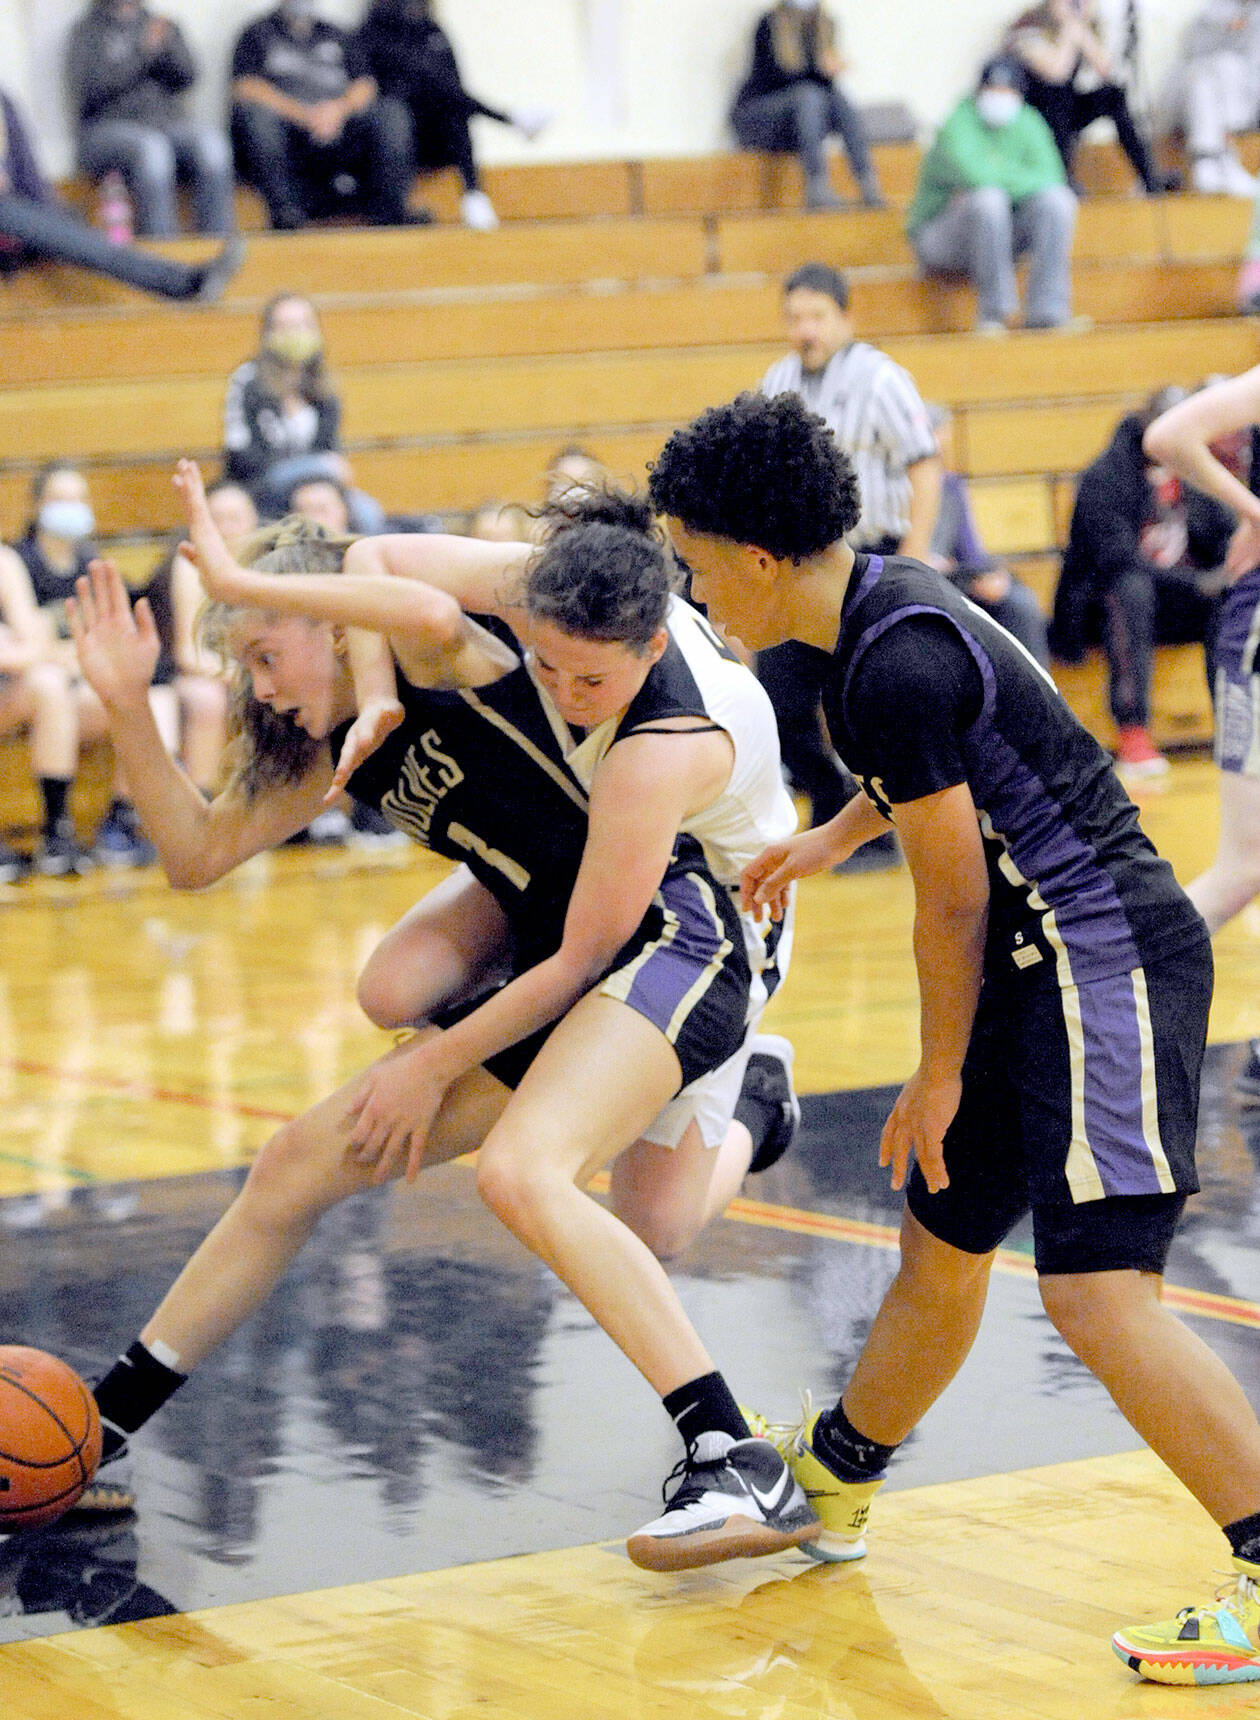 Lonnie Archibald/for Peninsula Daily News Sequim’s Sammie Bacon, left, and Forks’ Keiri Johnson battle in the key while Sequim’s Bobbie Mixon, right, looks on. The Sequim girls won 61-44.